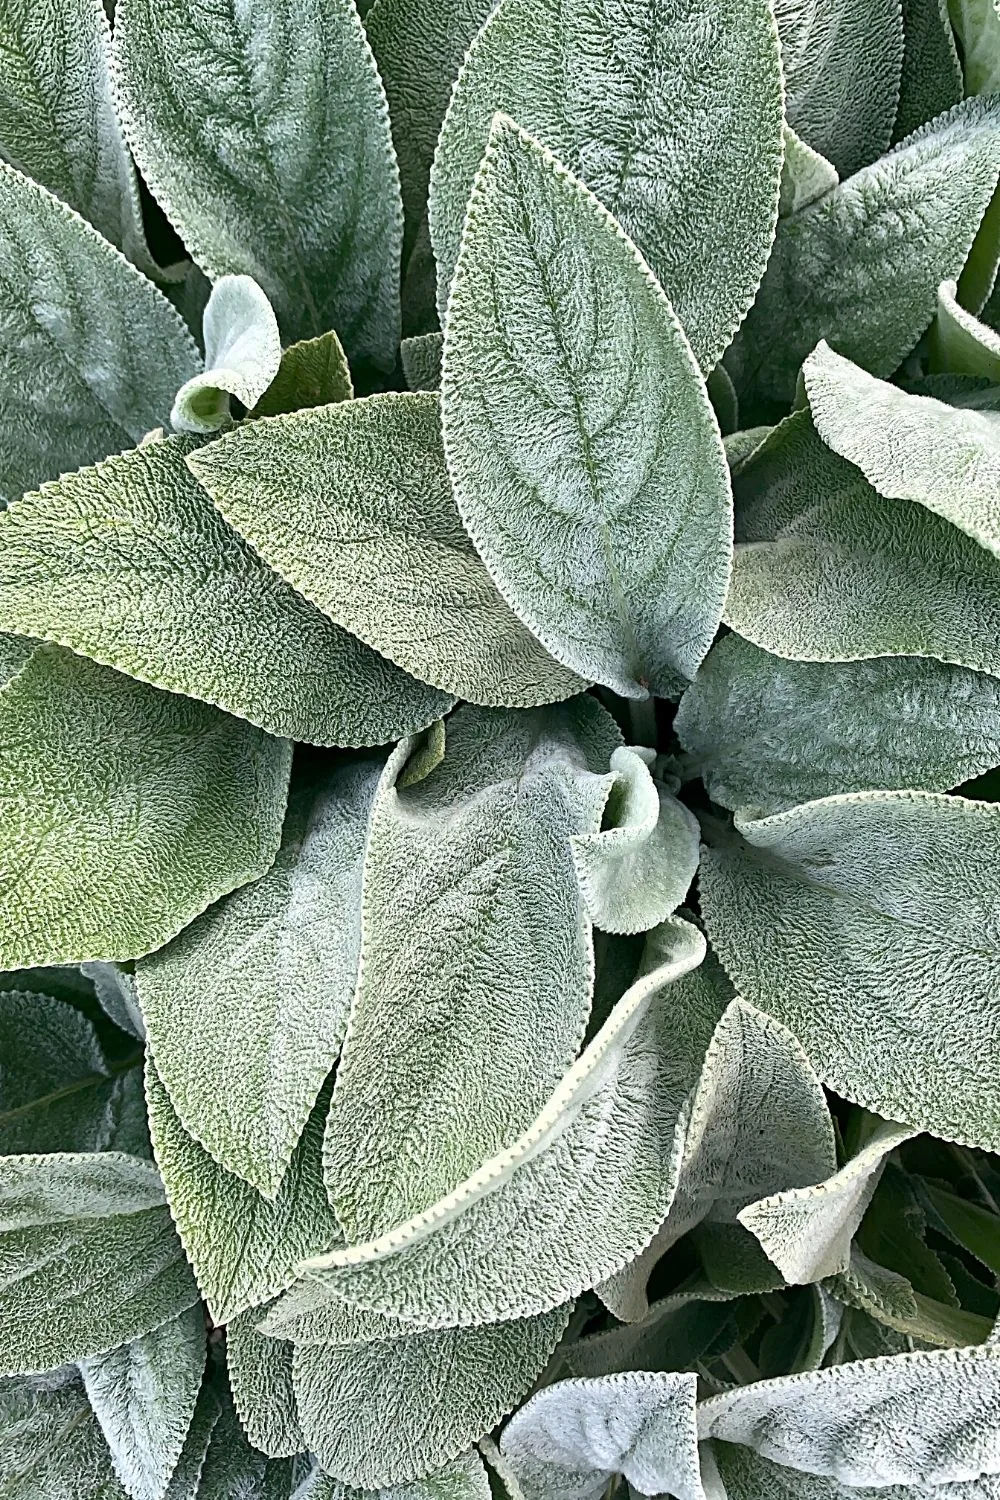 Lamb’s ear, known for its soft and fuzzy foliage, is another great addition to the west-facing side of the house garden